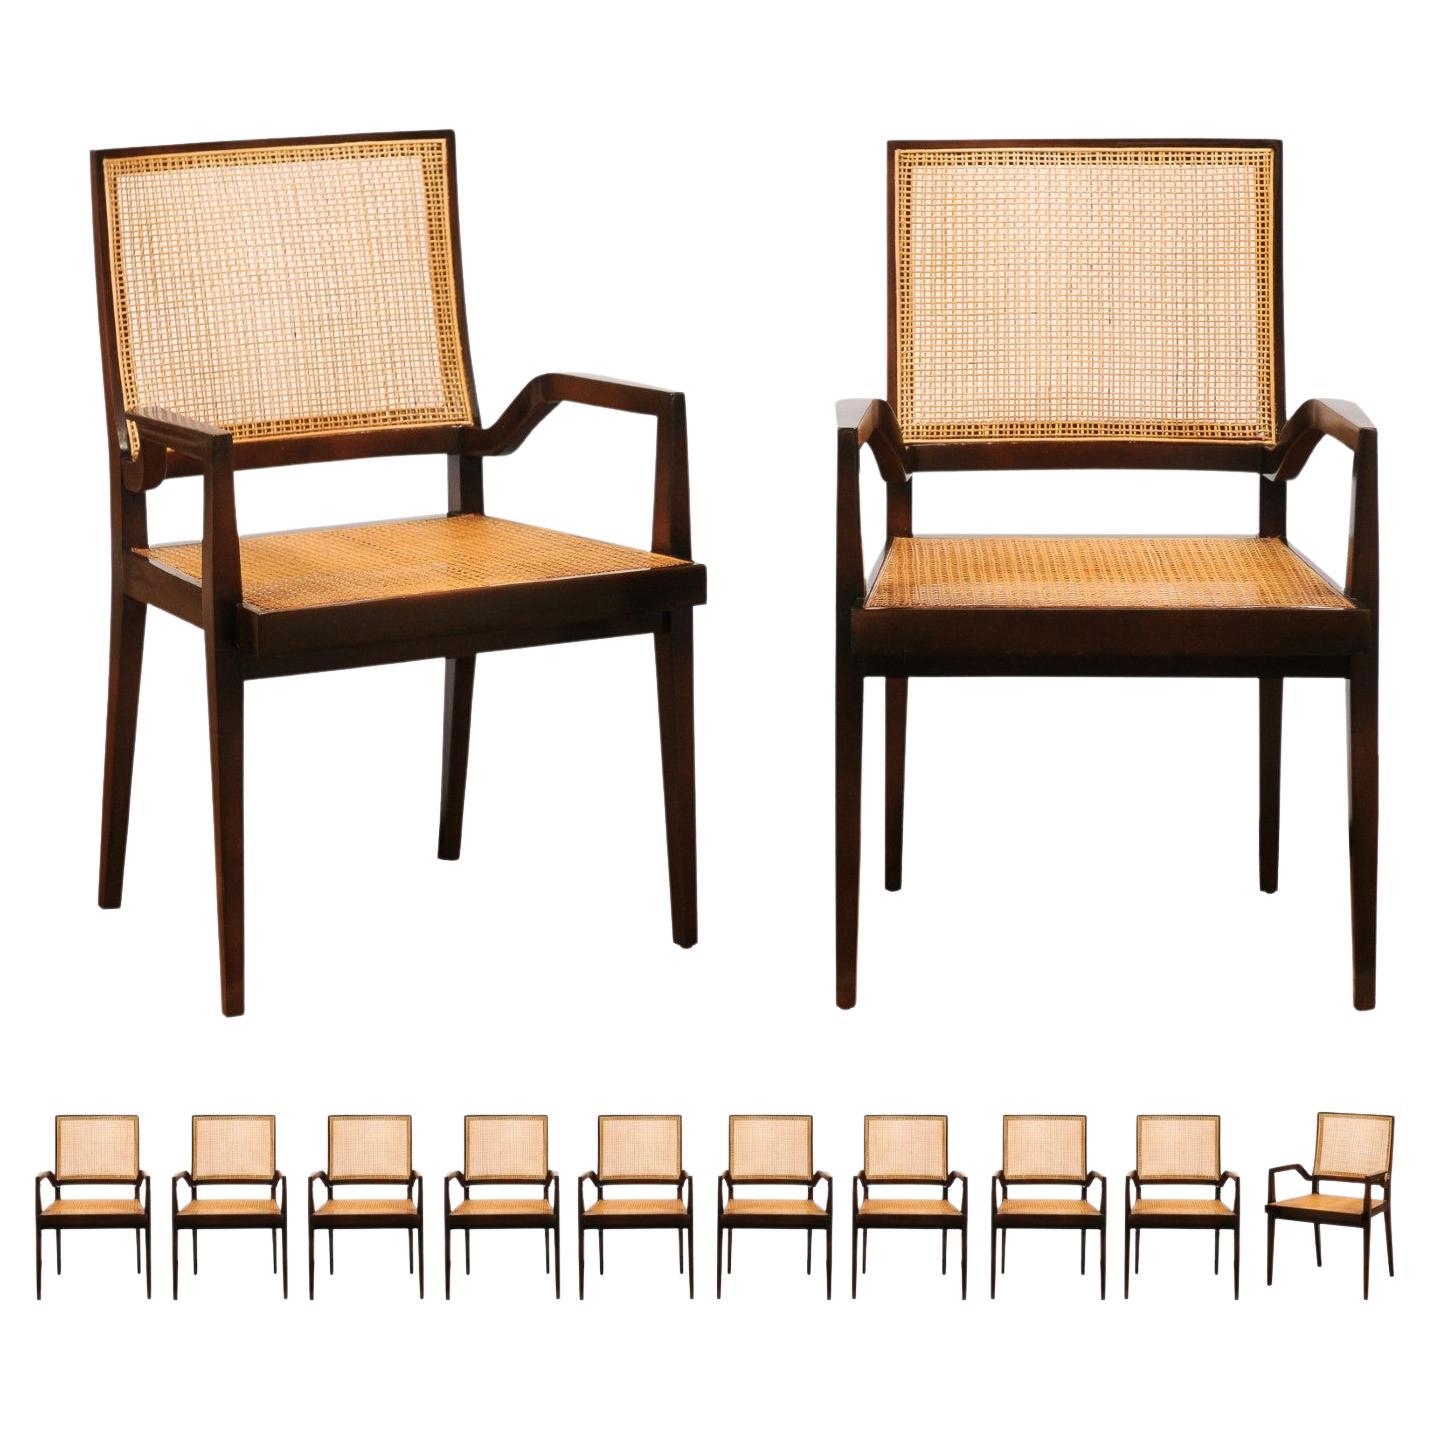 Unrivaled Set of 12 Cane Dining Chairs by Michael Taylor, circa 1960- Cane Seat